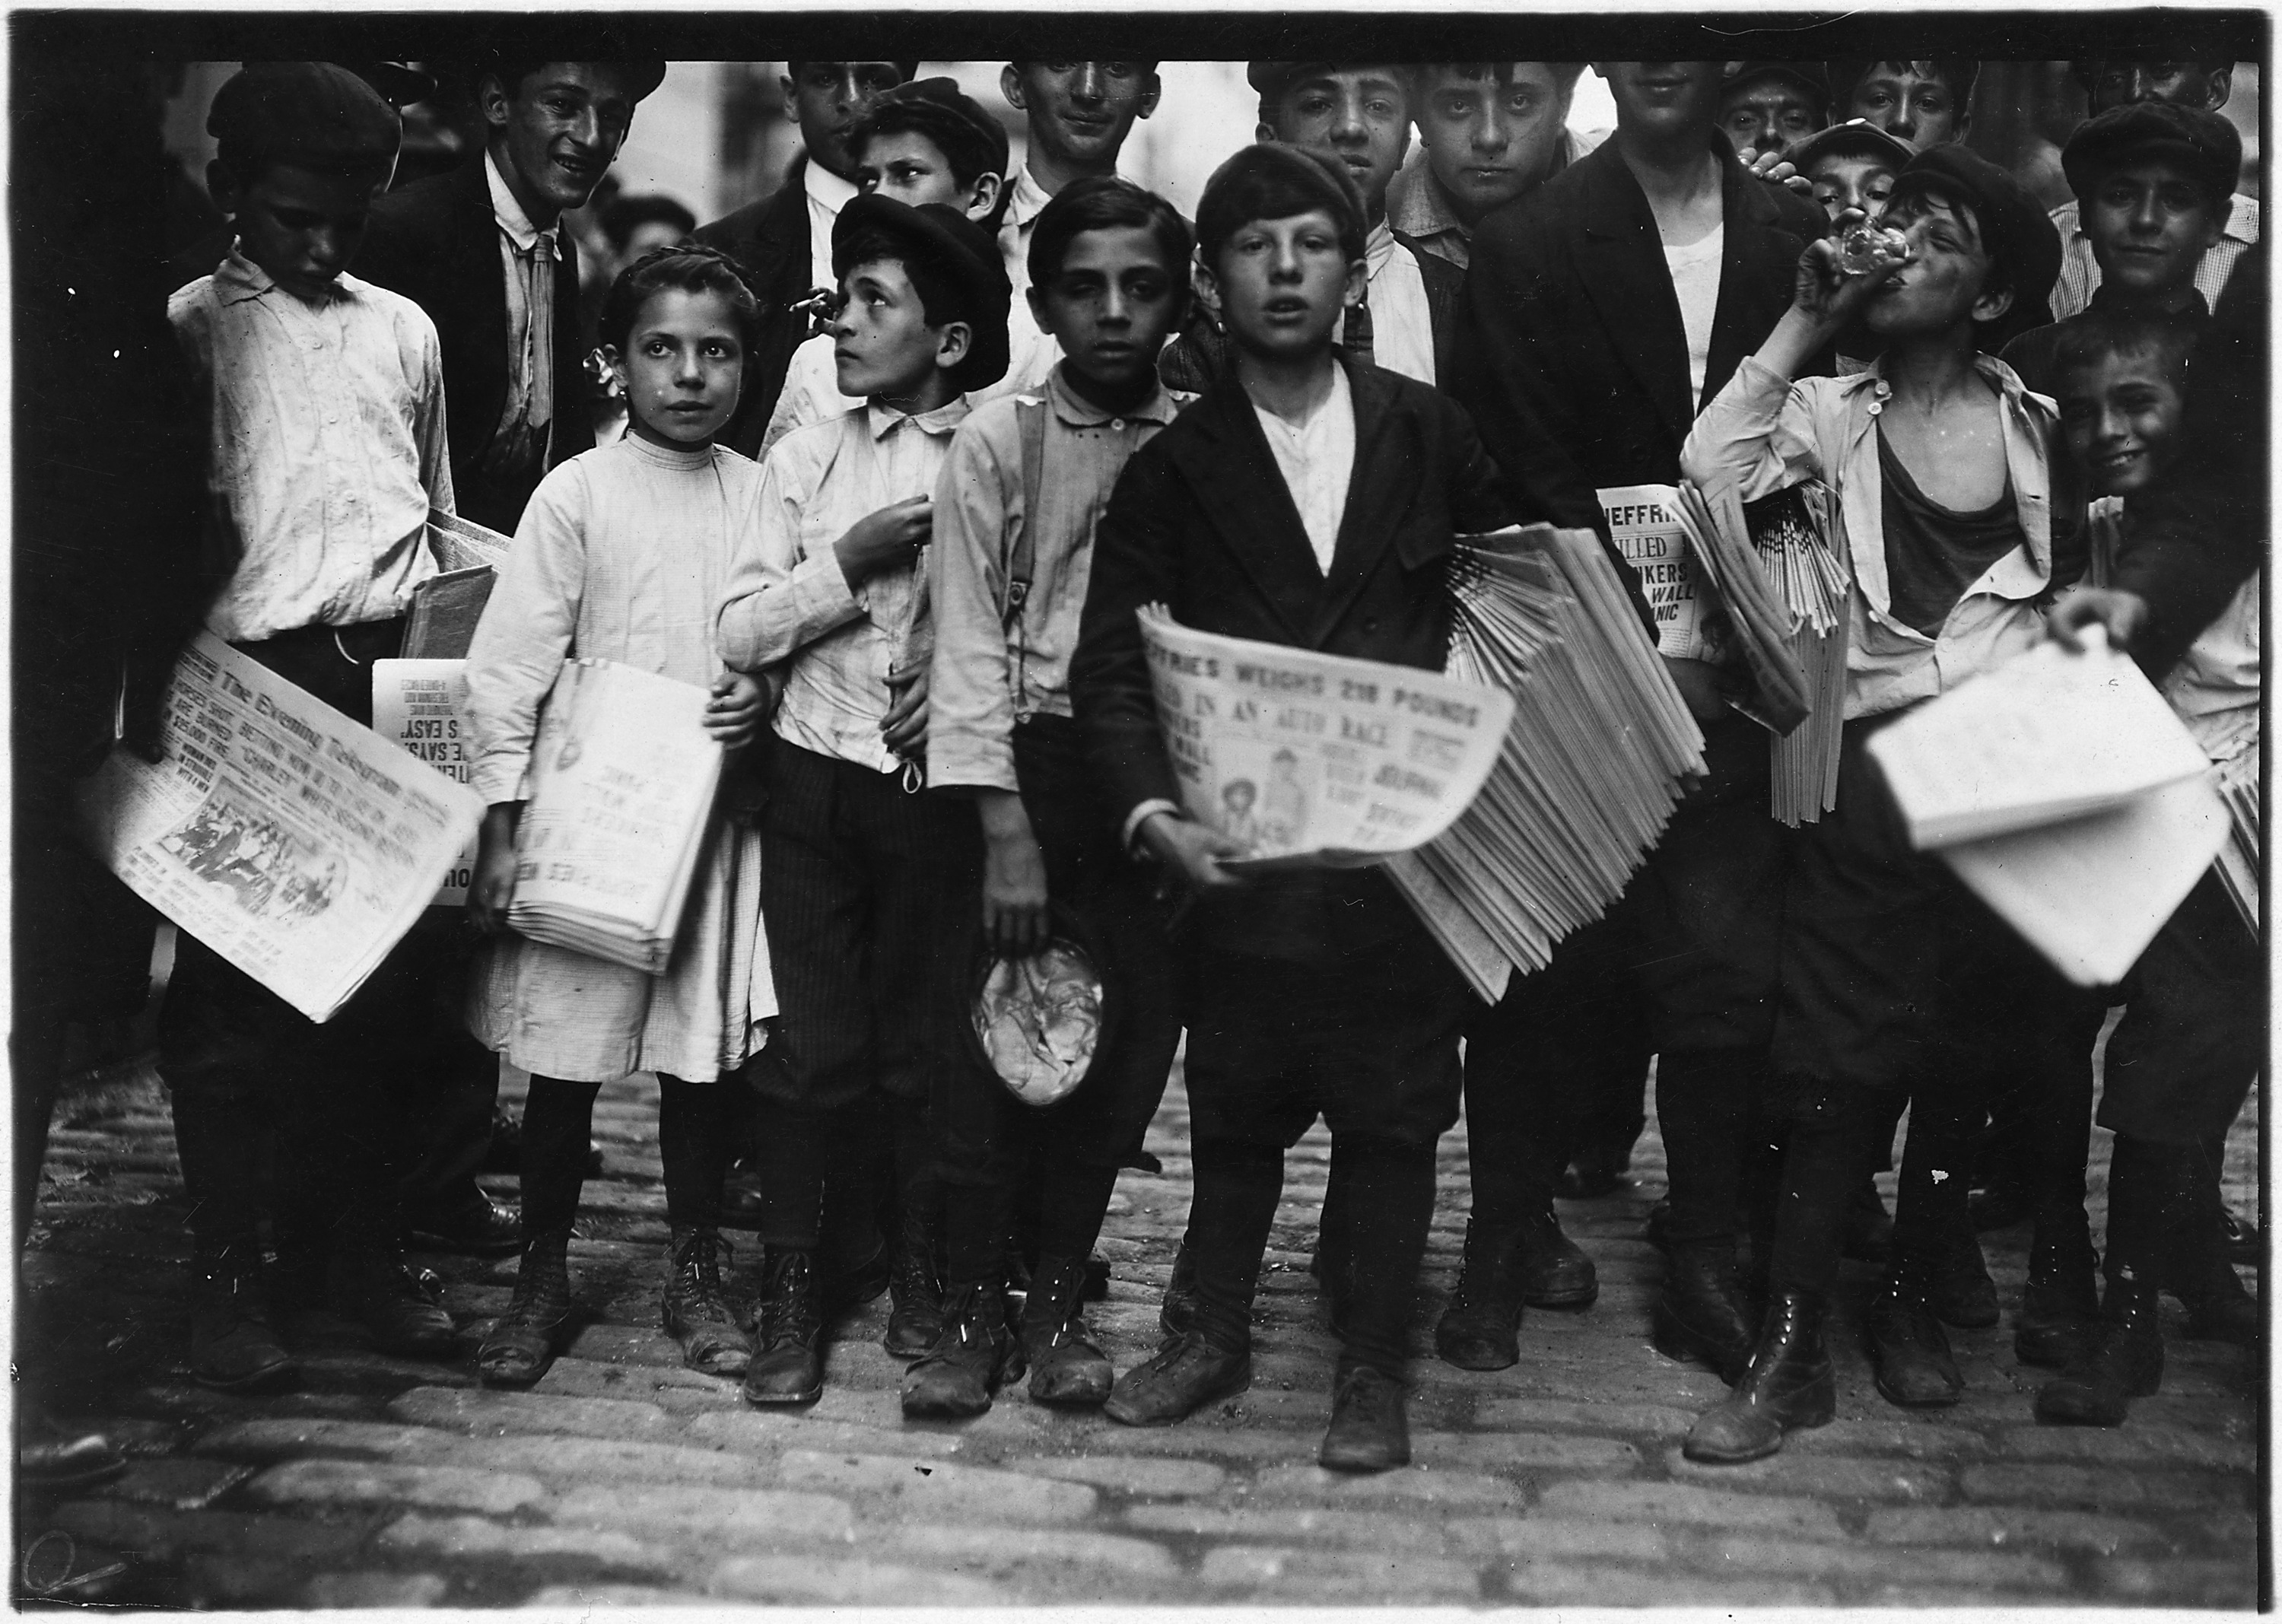 Newsboys and newsgirl. Getting afternoon papers. New York City. - NARA - 523329